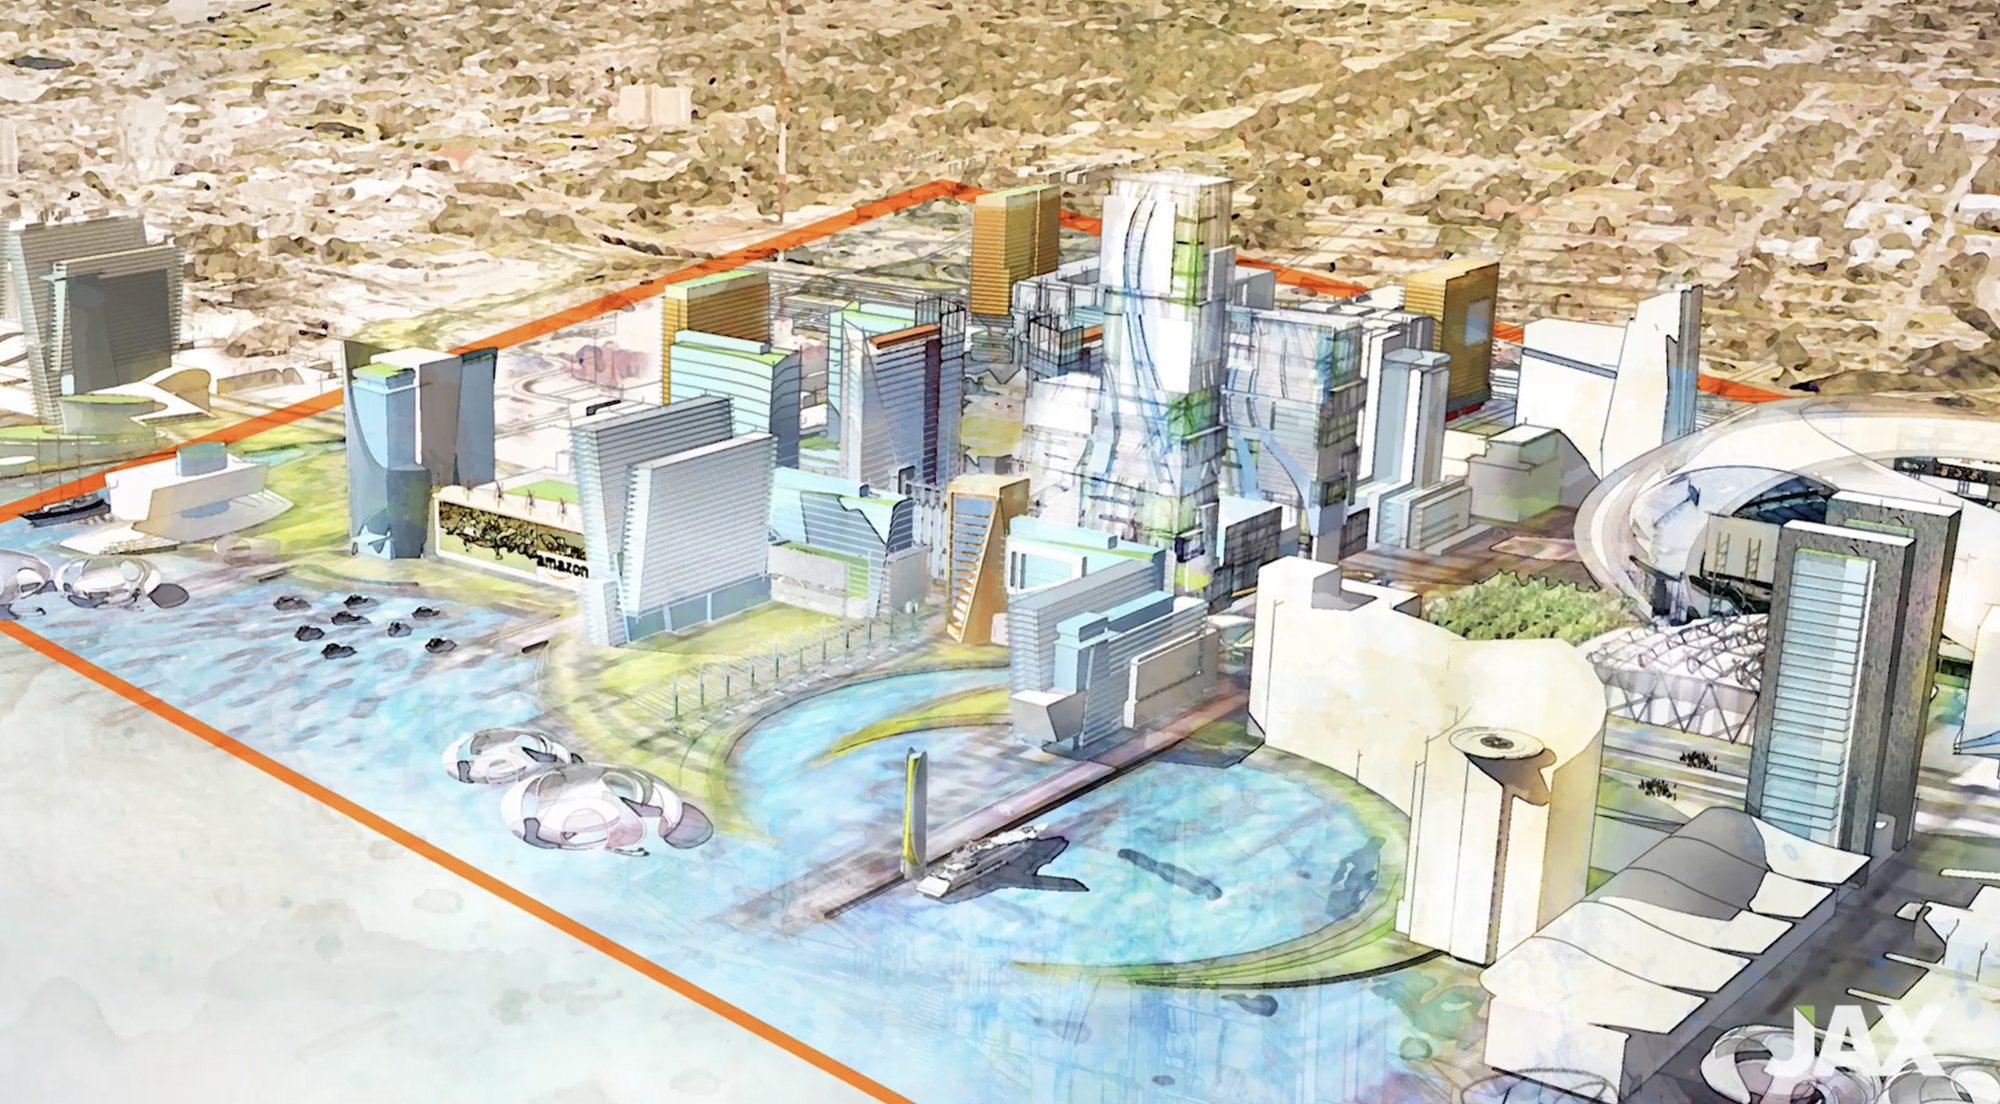 An illustration from a video shows the potential Amazon headquarters between EverBank Field and Downtown. The video is part of Jacksonville’s bid for the project.